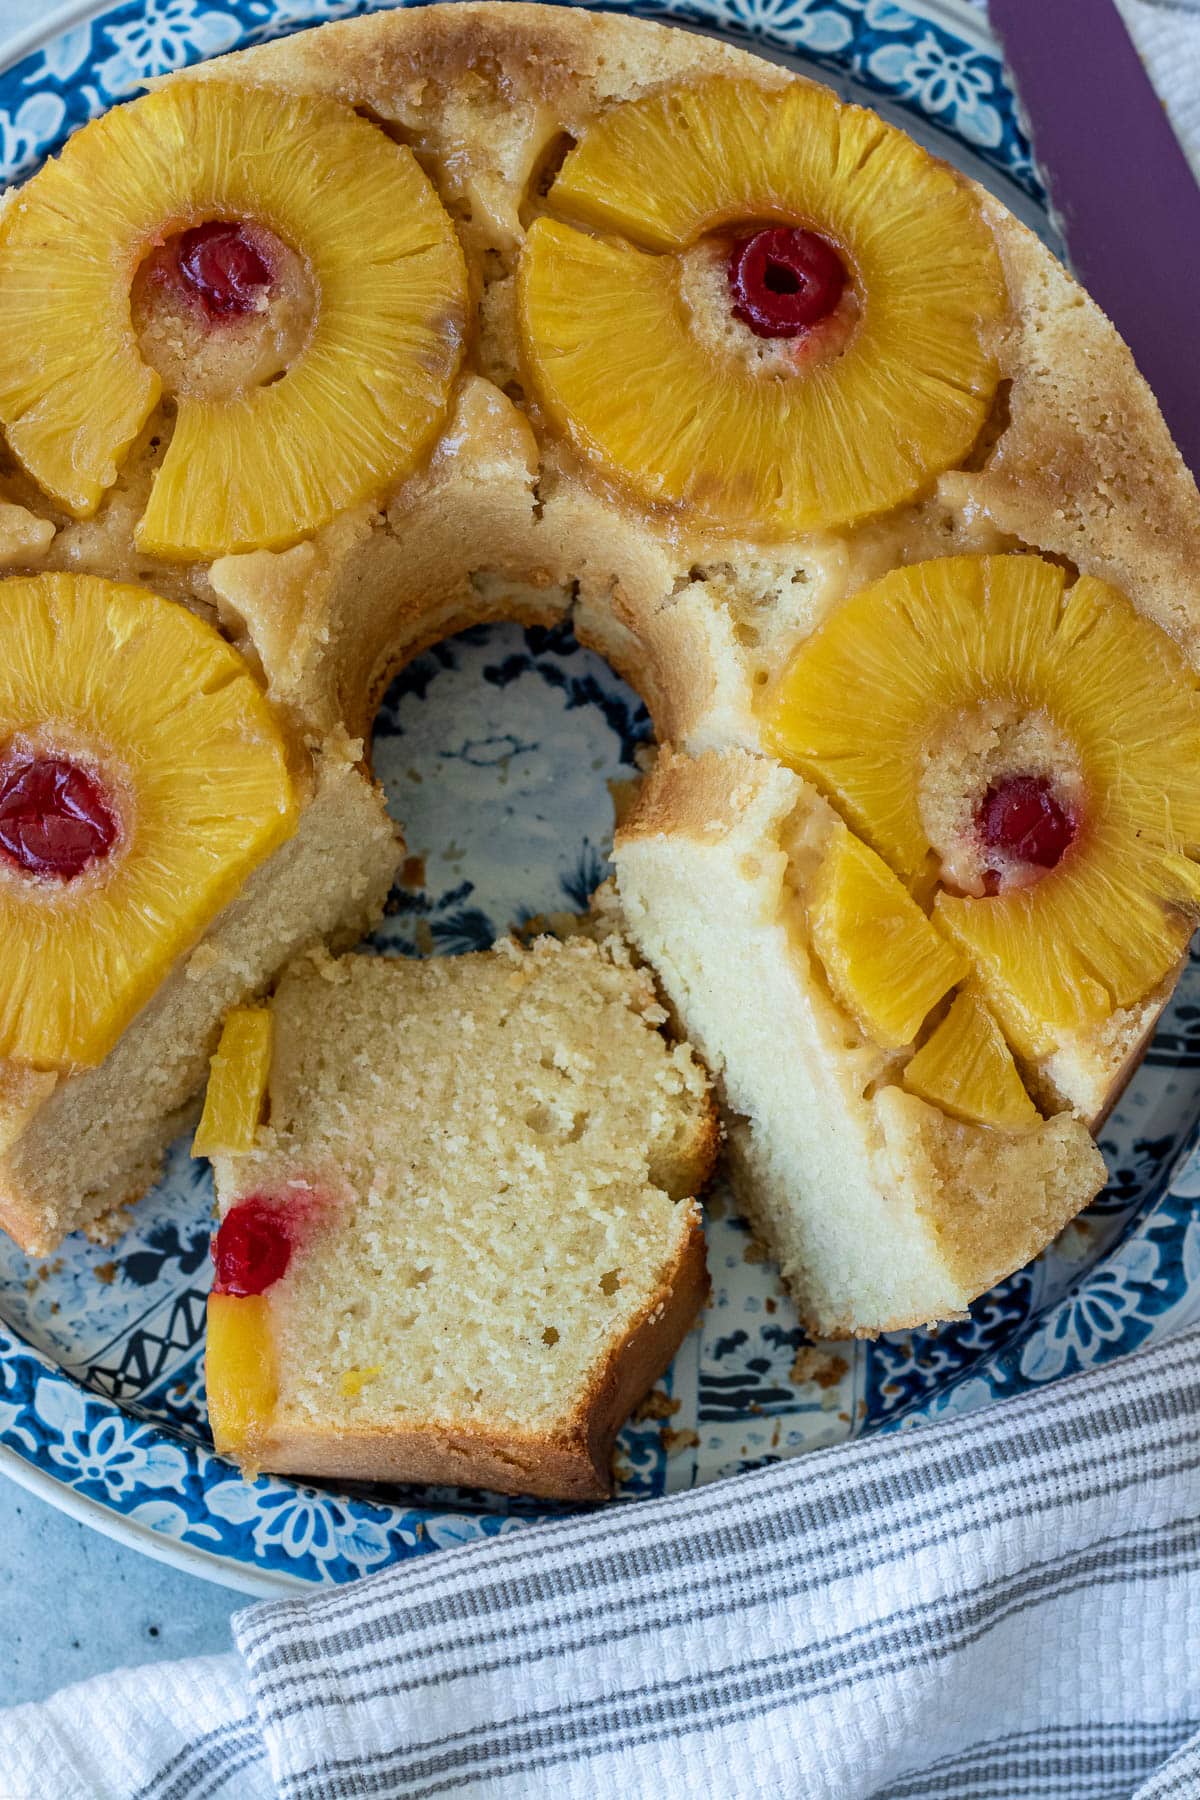 Pineapple Upside Down Pound Cake with pineapple slices and maraschino cherries.